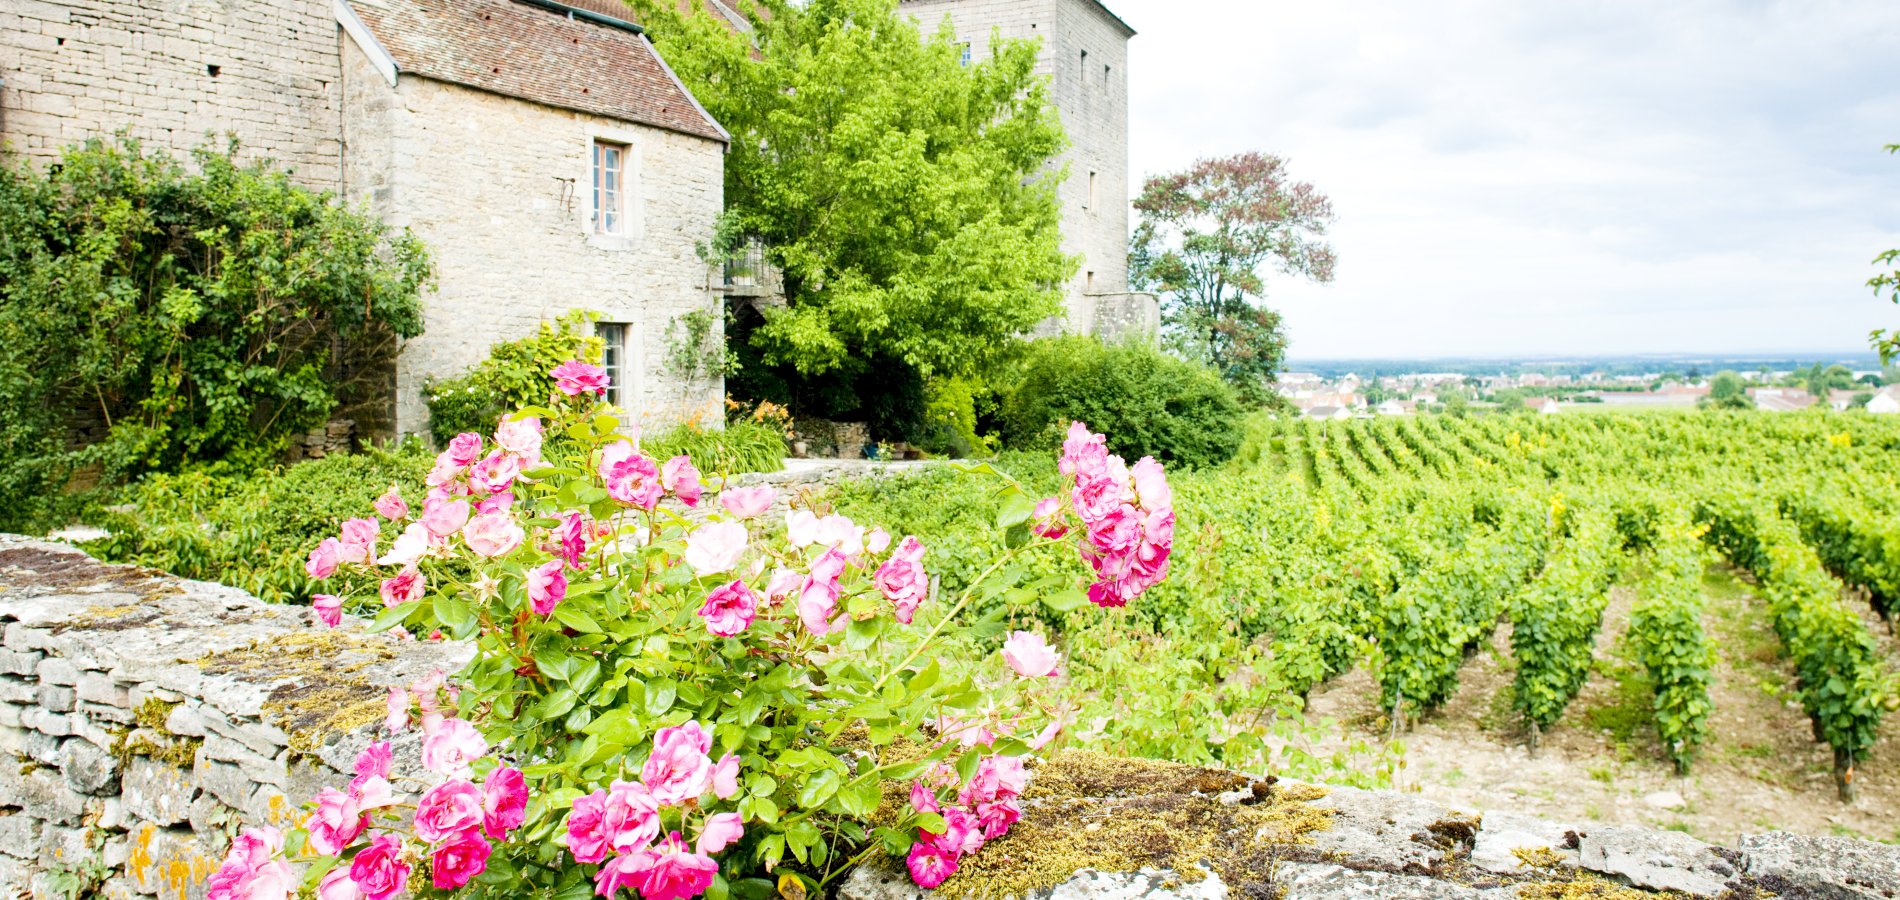 Ophorus Tours - A Private Burgundy Gourmet Food & Wine Tour from Beaune